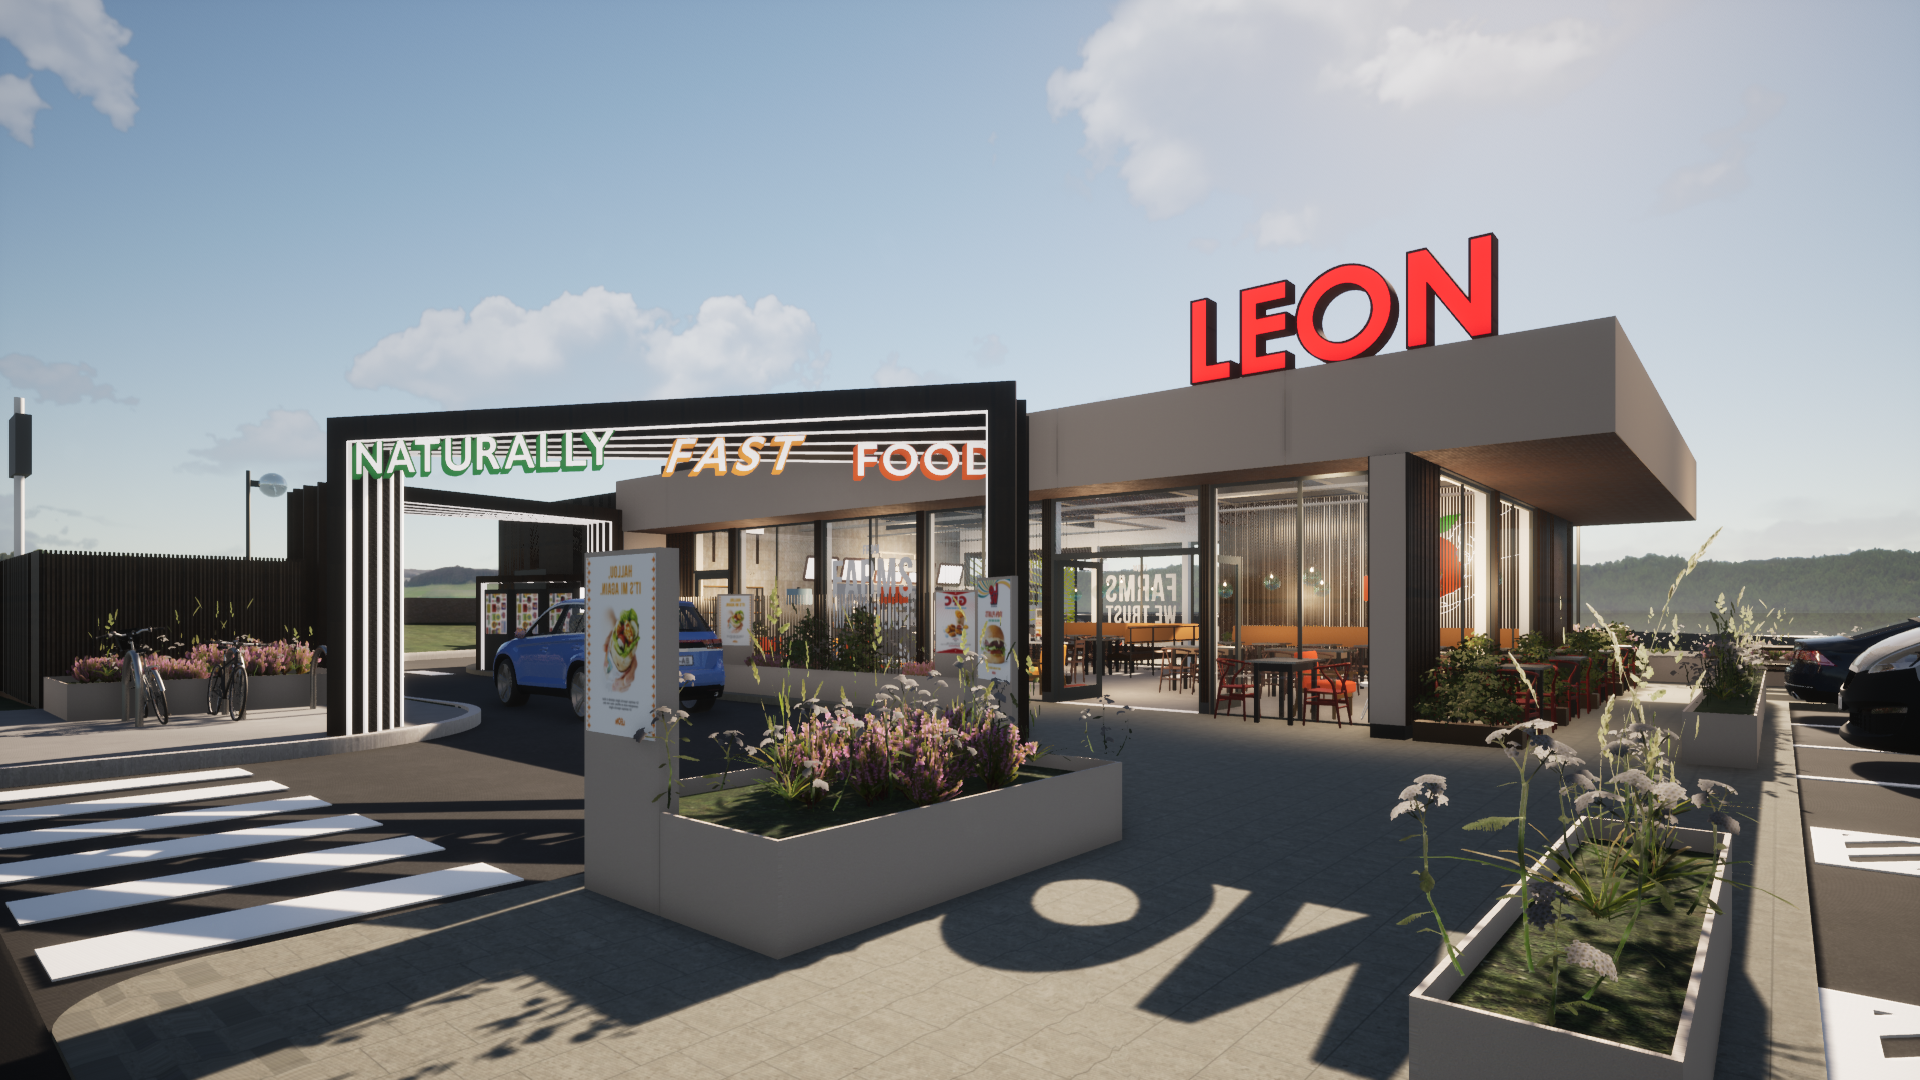 An artist's impression of how the first Leon drive-thru will look